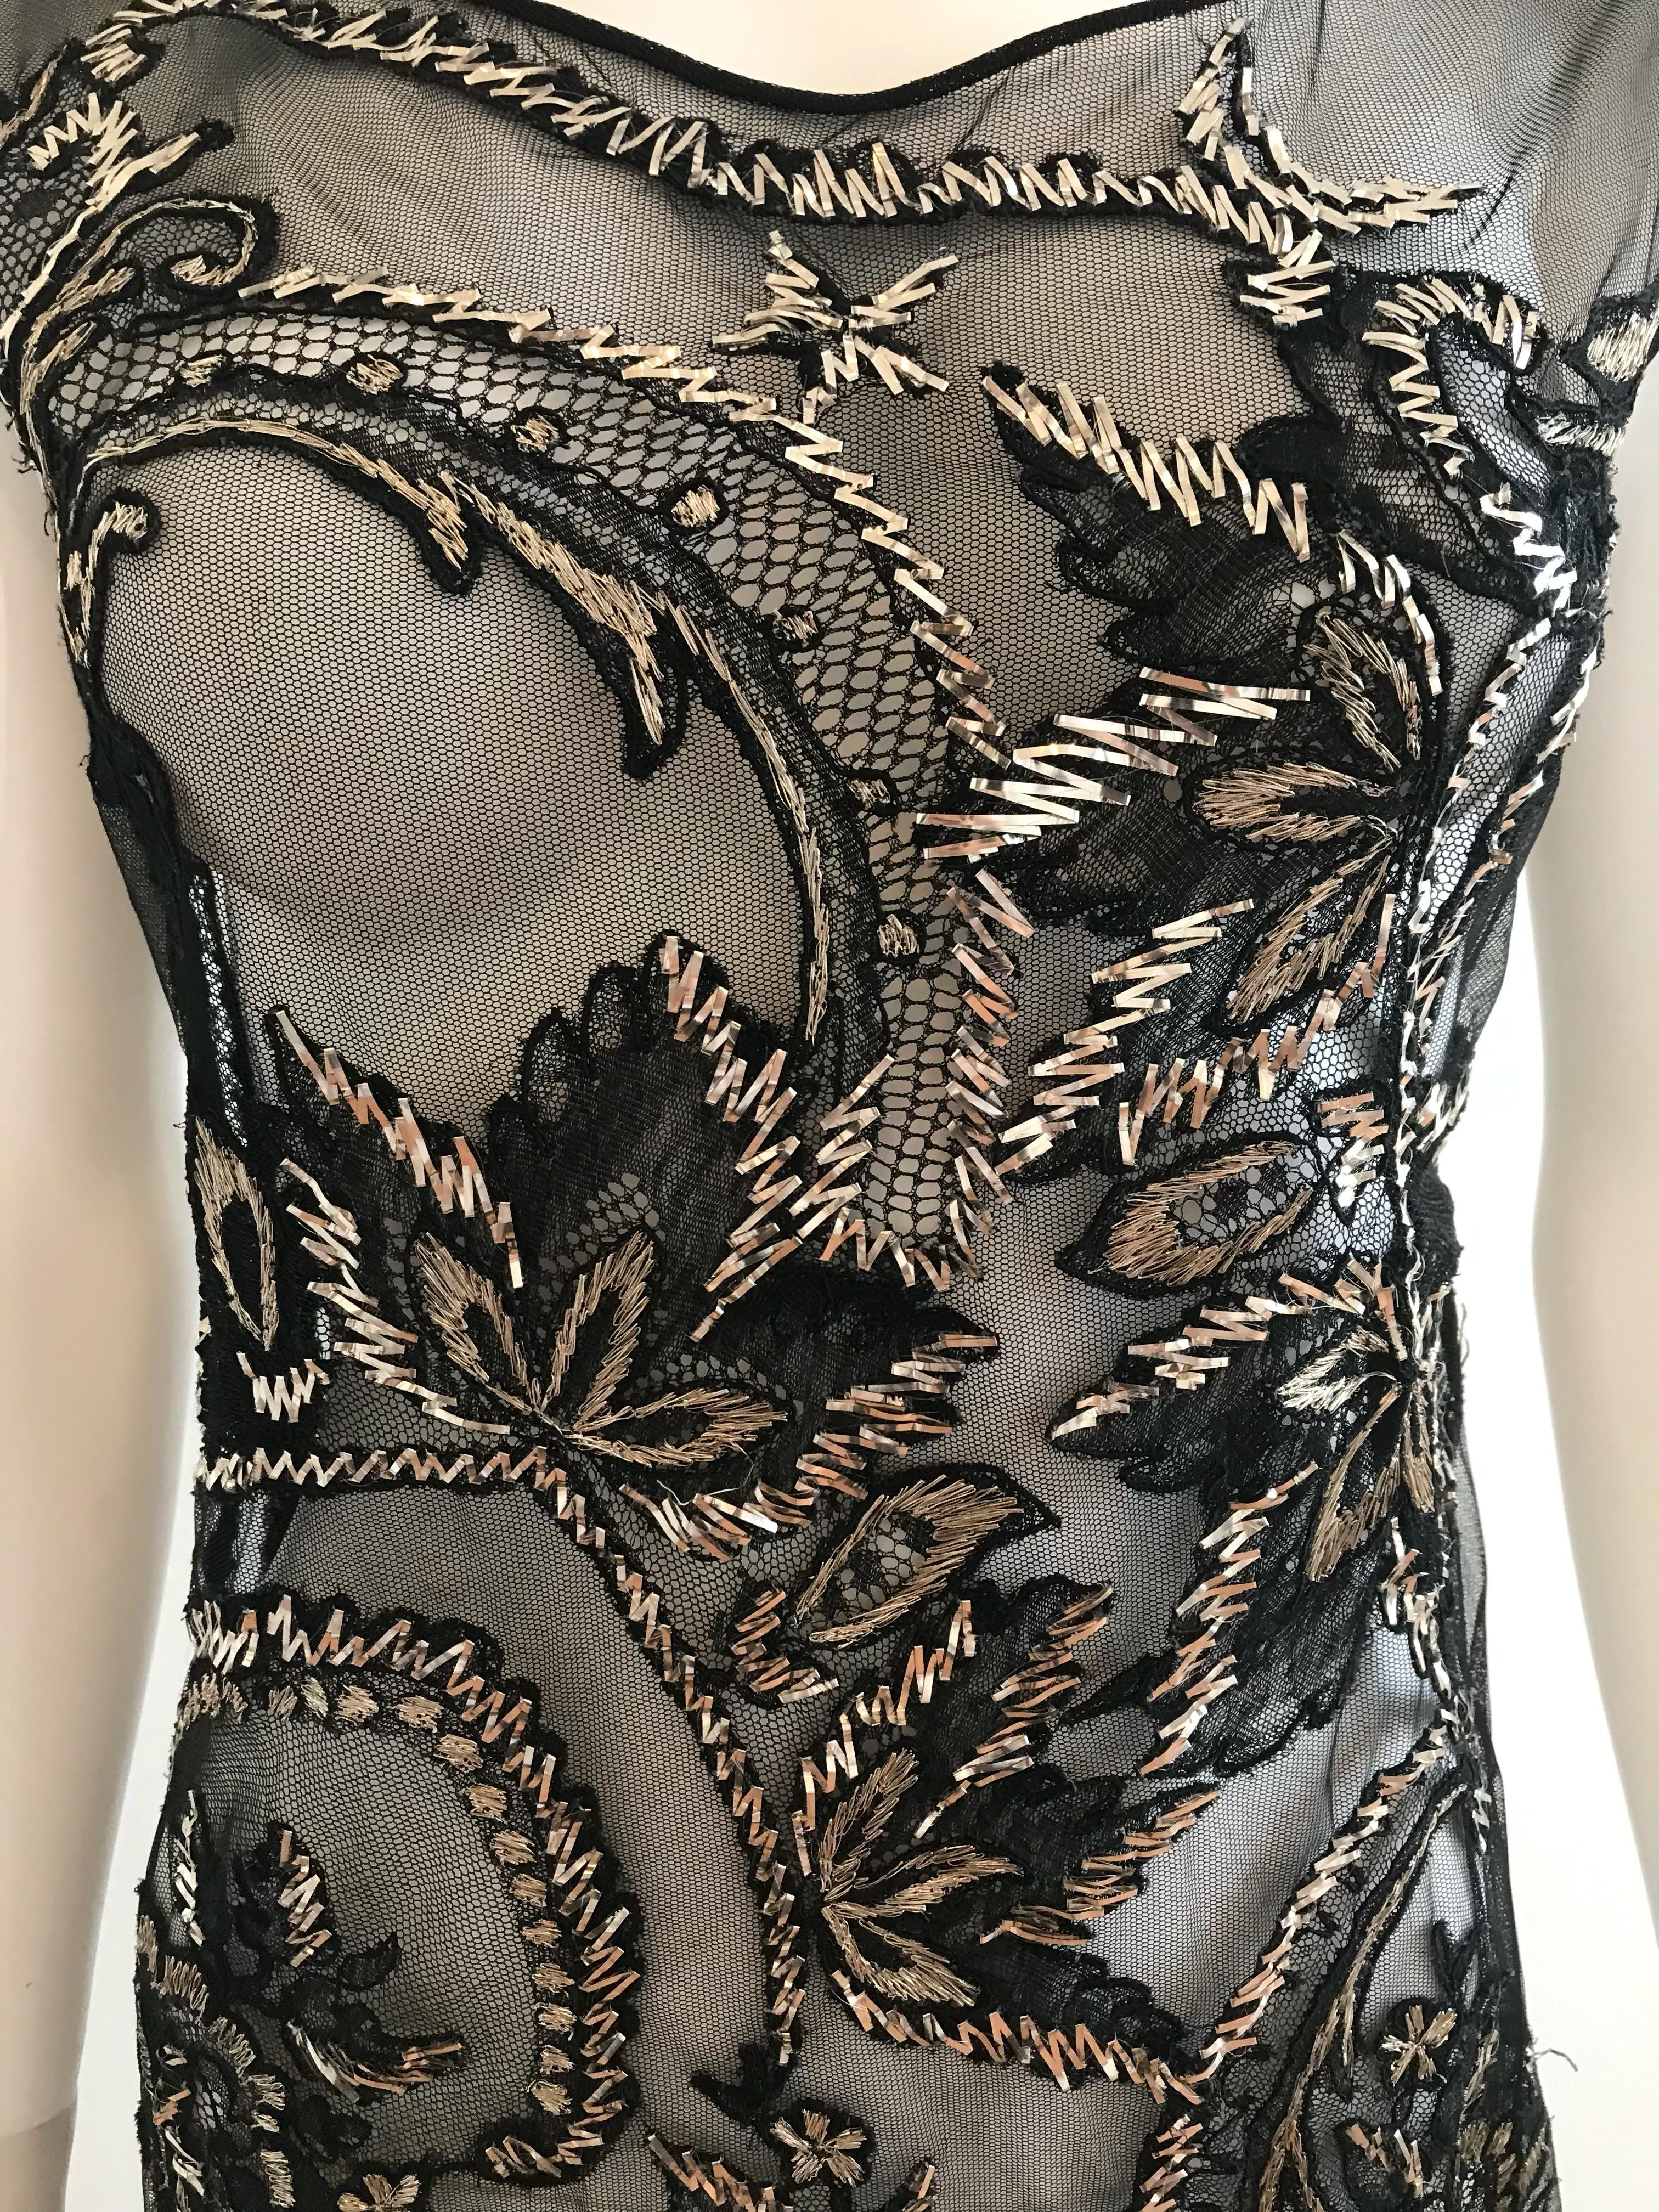 FW 1998 Gianfranco Ferre Metallic Embroidered Tulle Evening Gown For Sale 10